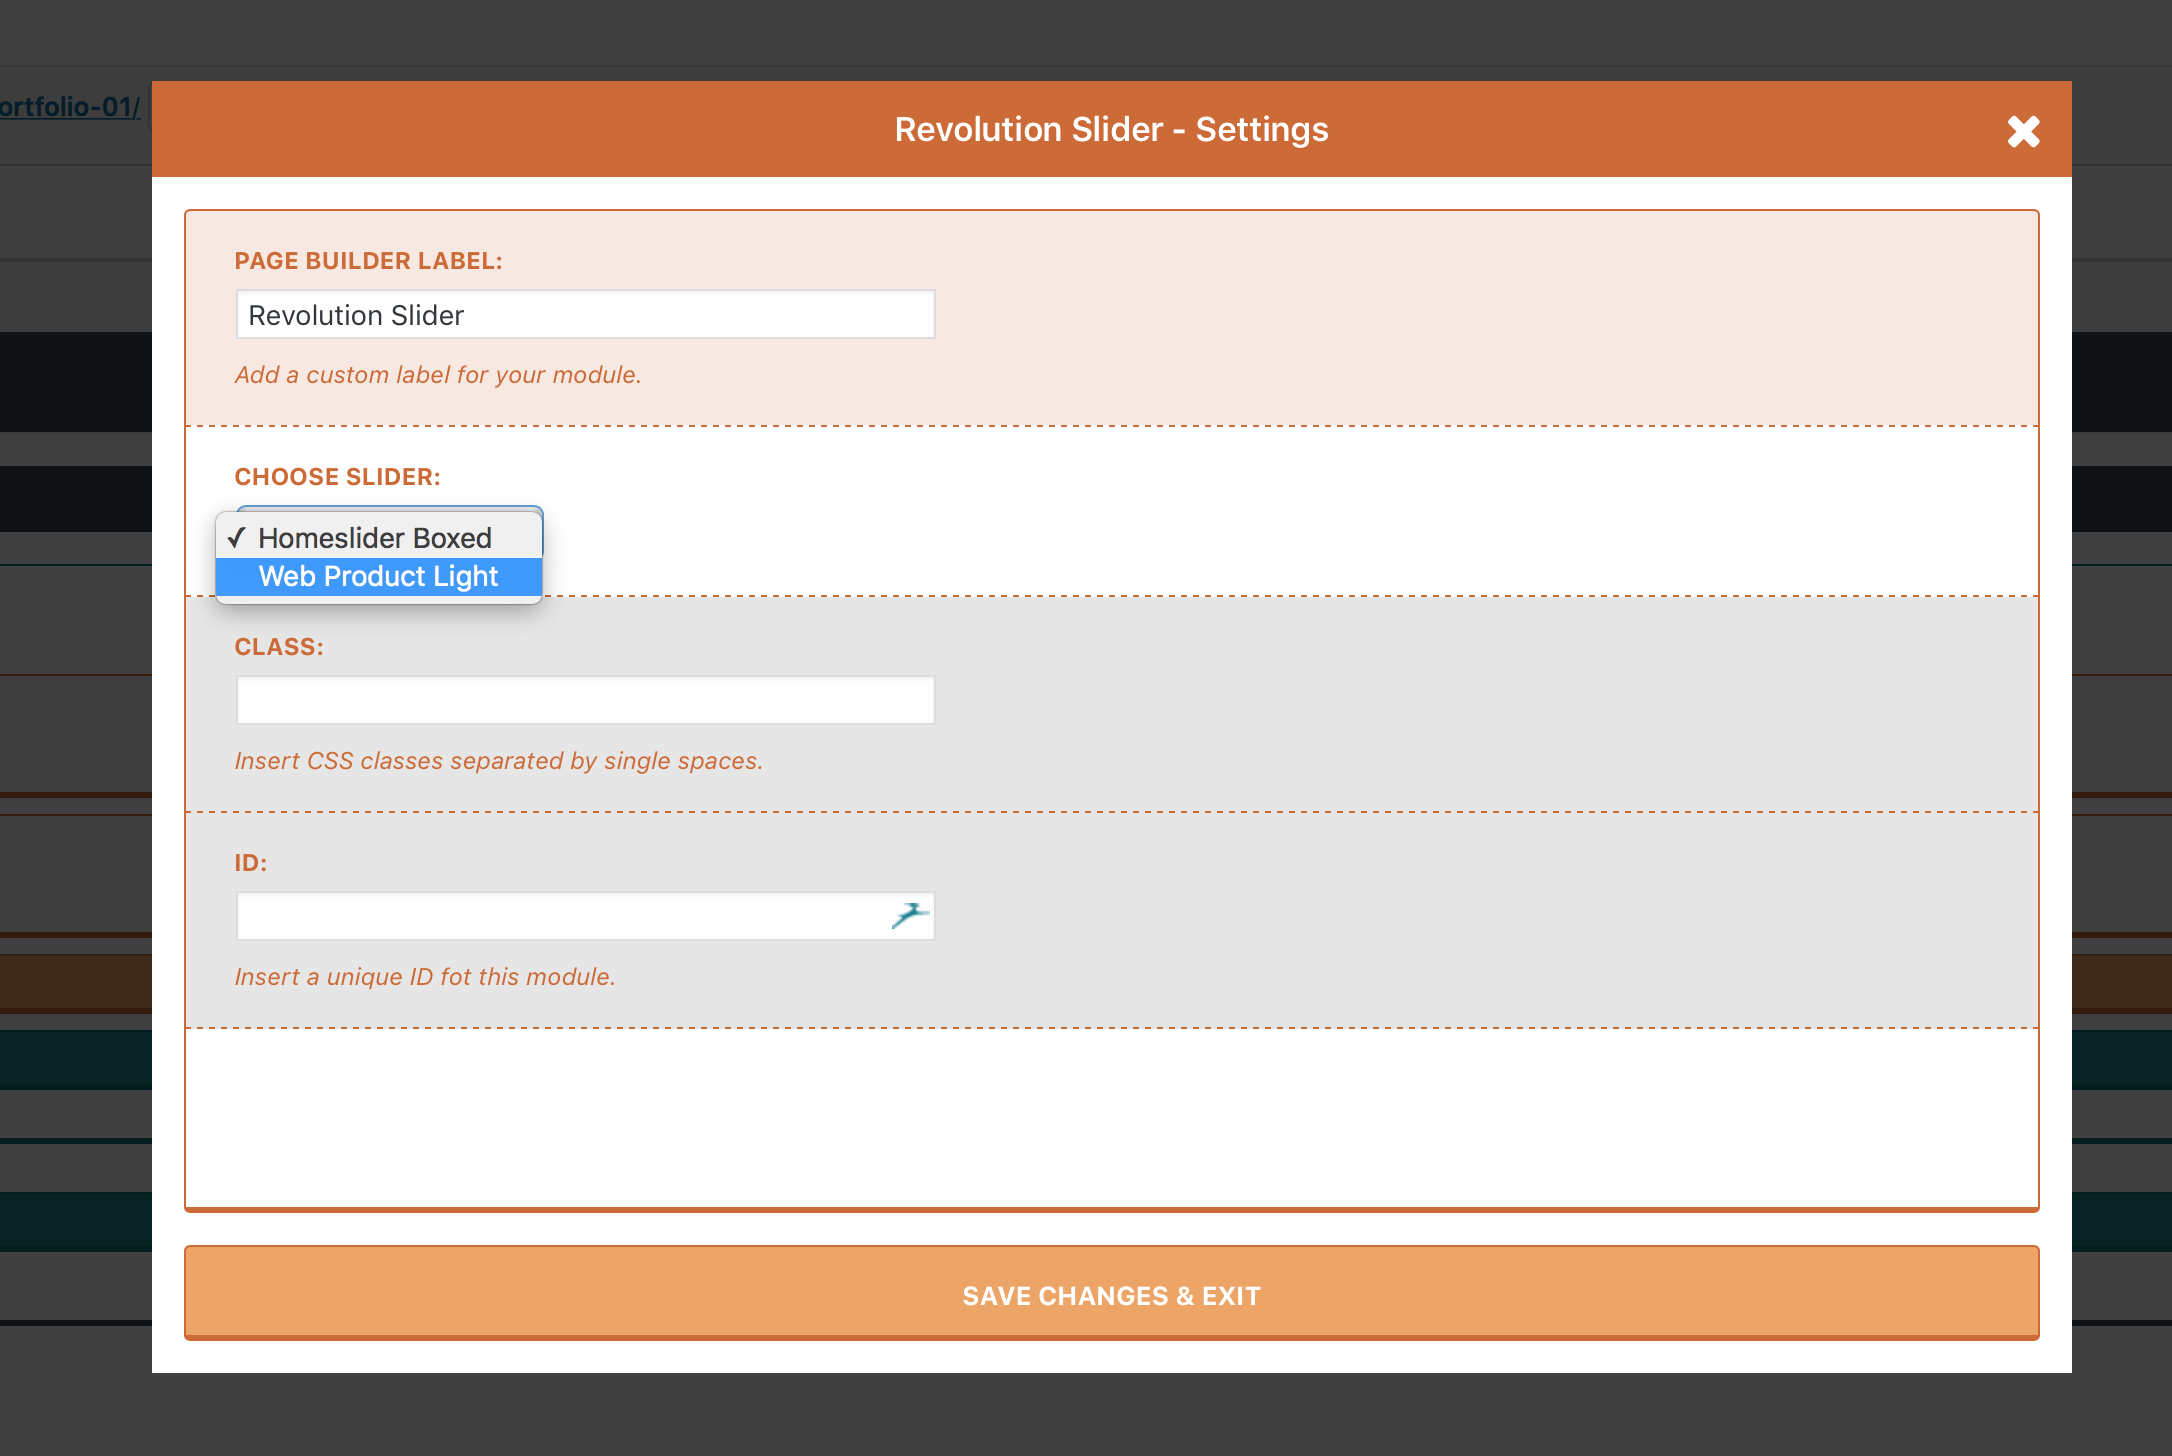 Revolution Slider as a page builder module, choose a slider in a select field